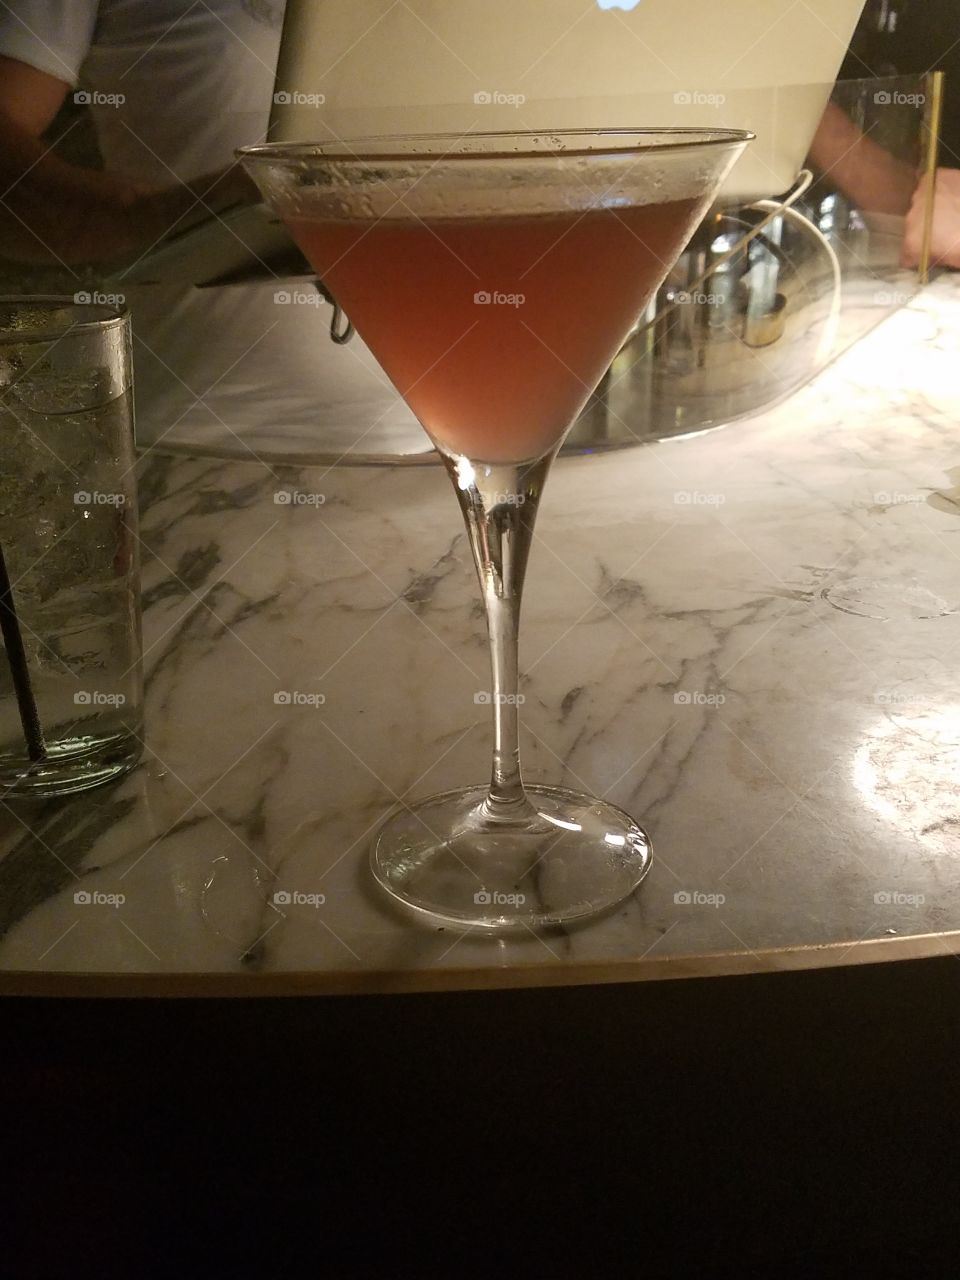 A vodka alcoholic drink in a classic V-shaped glass at a bar in some dark lighting.